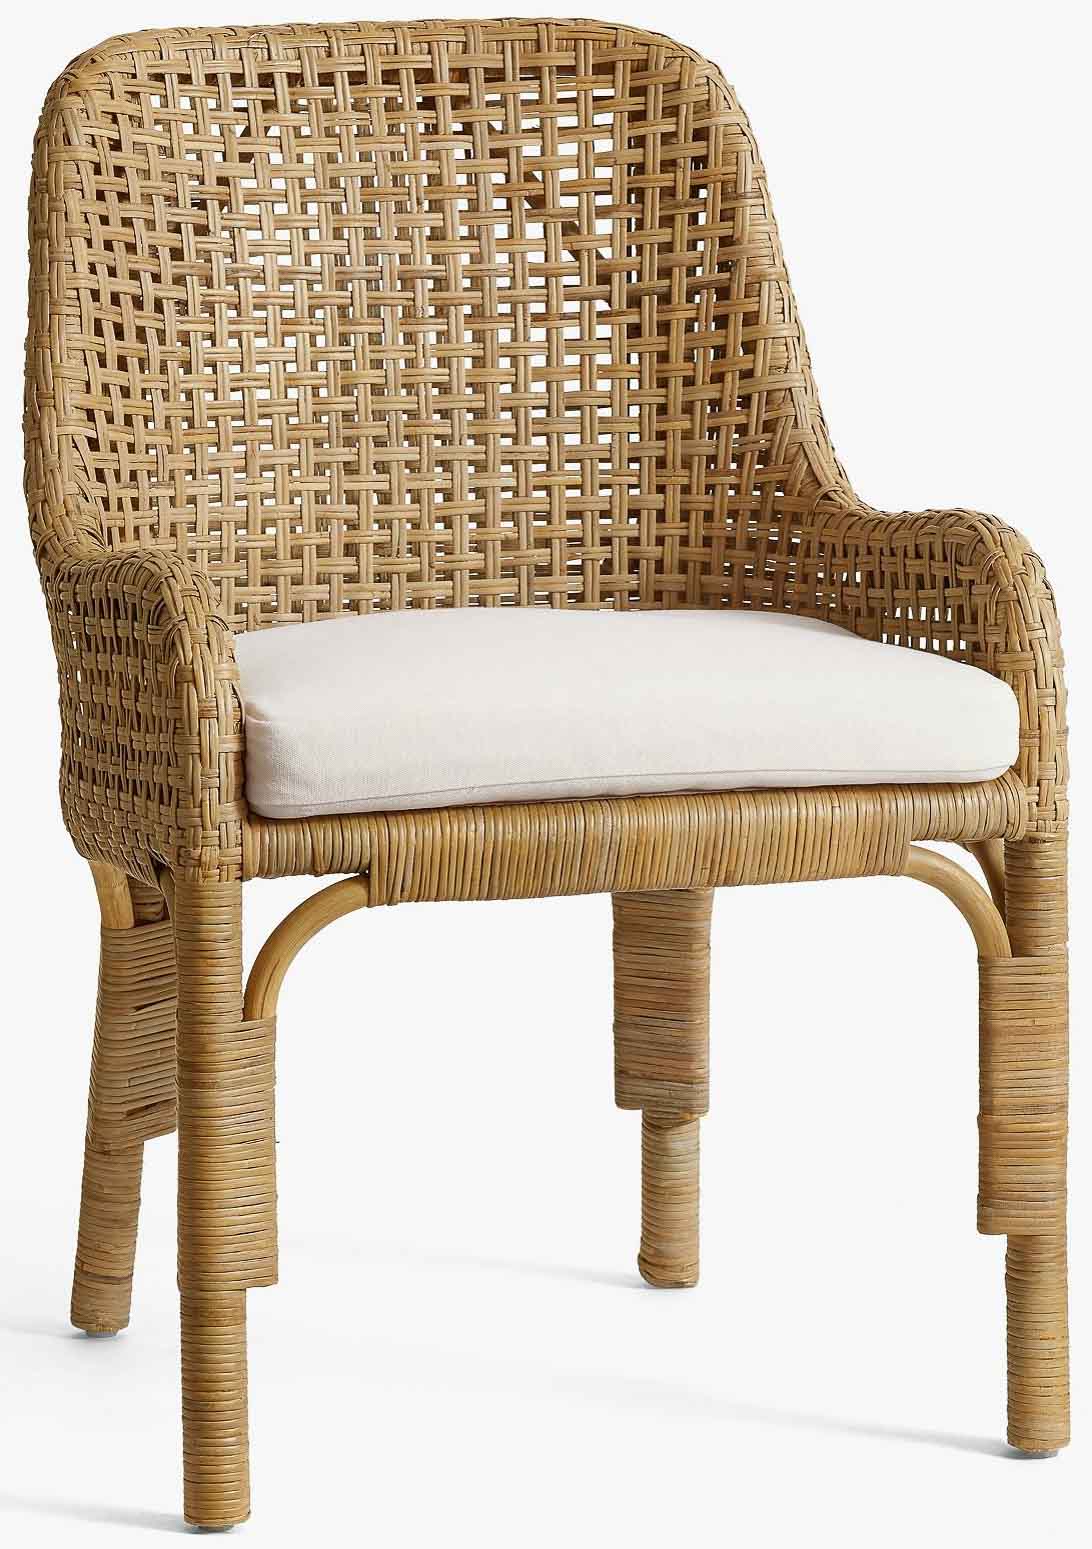 Rattan dining chair with curved back